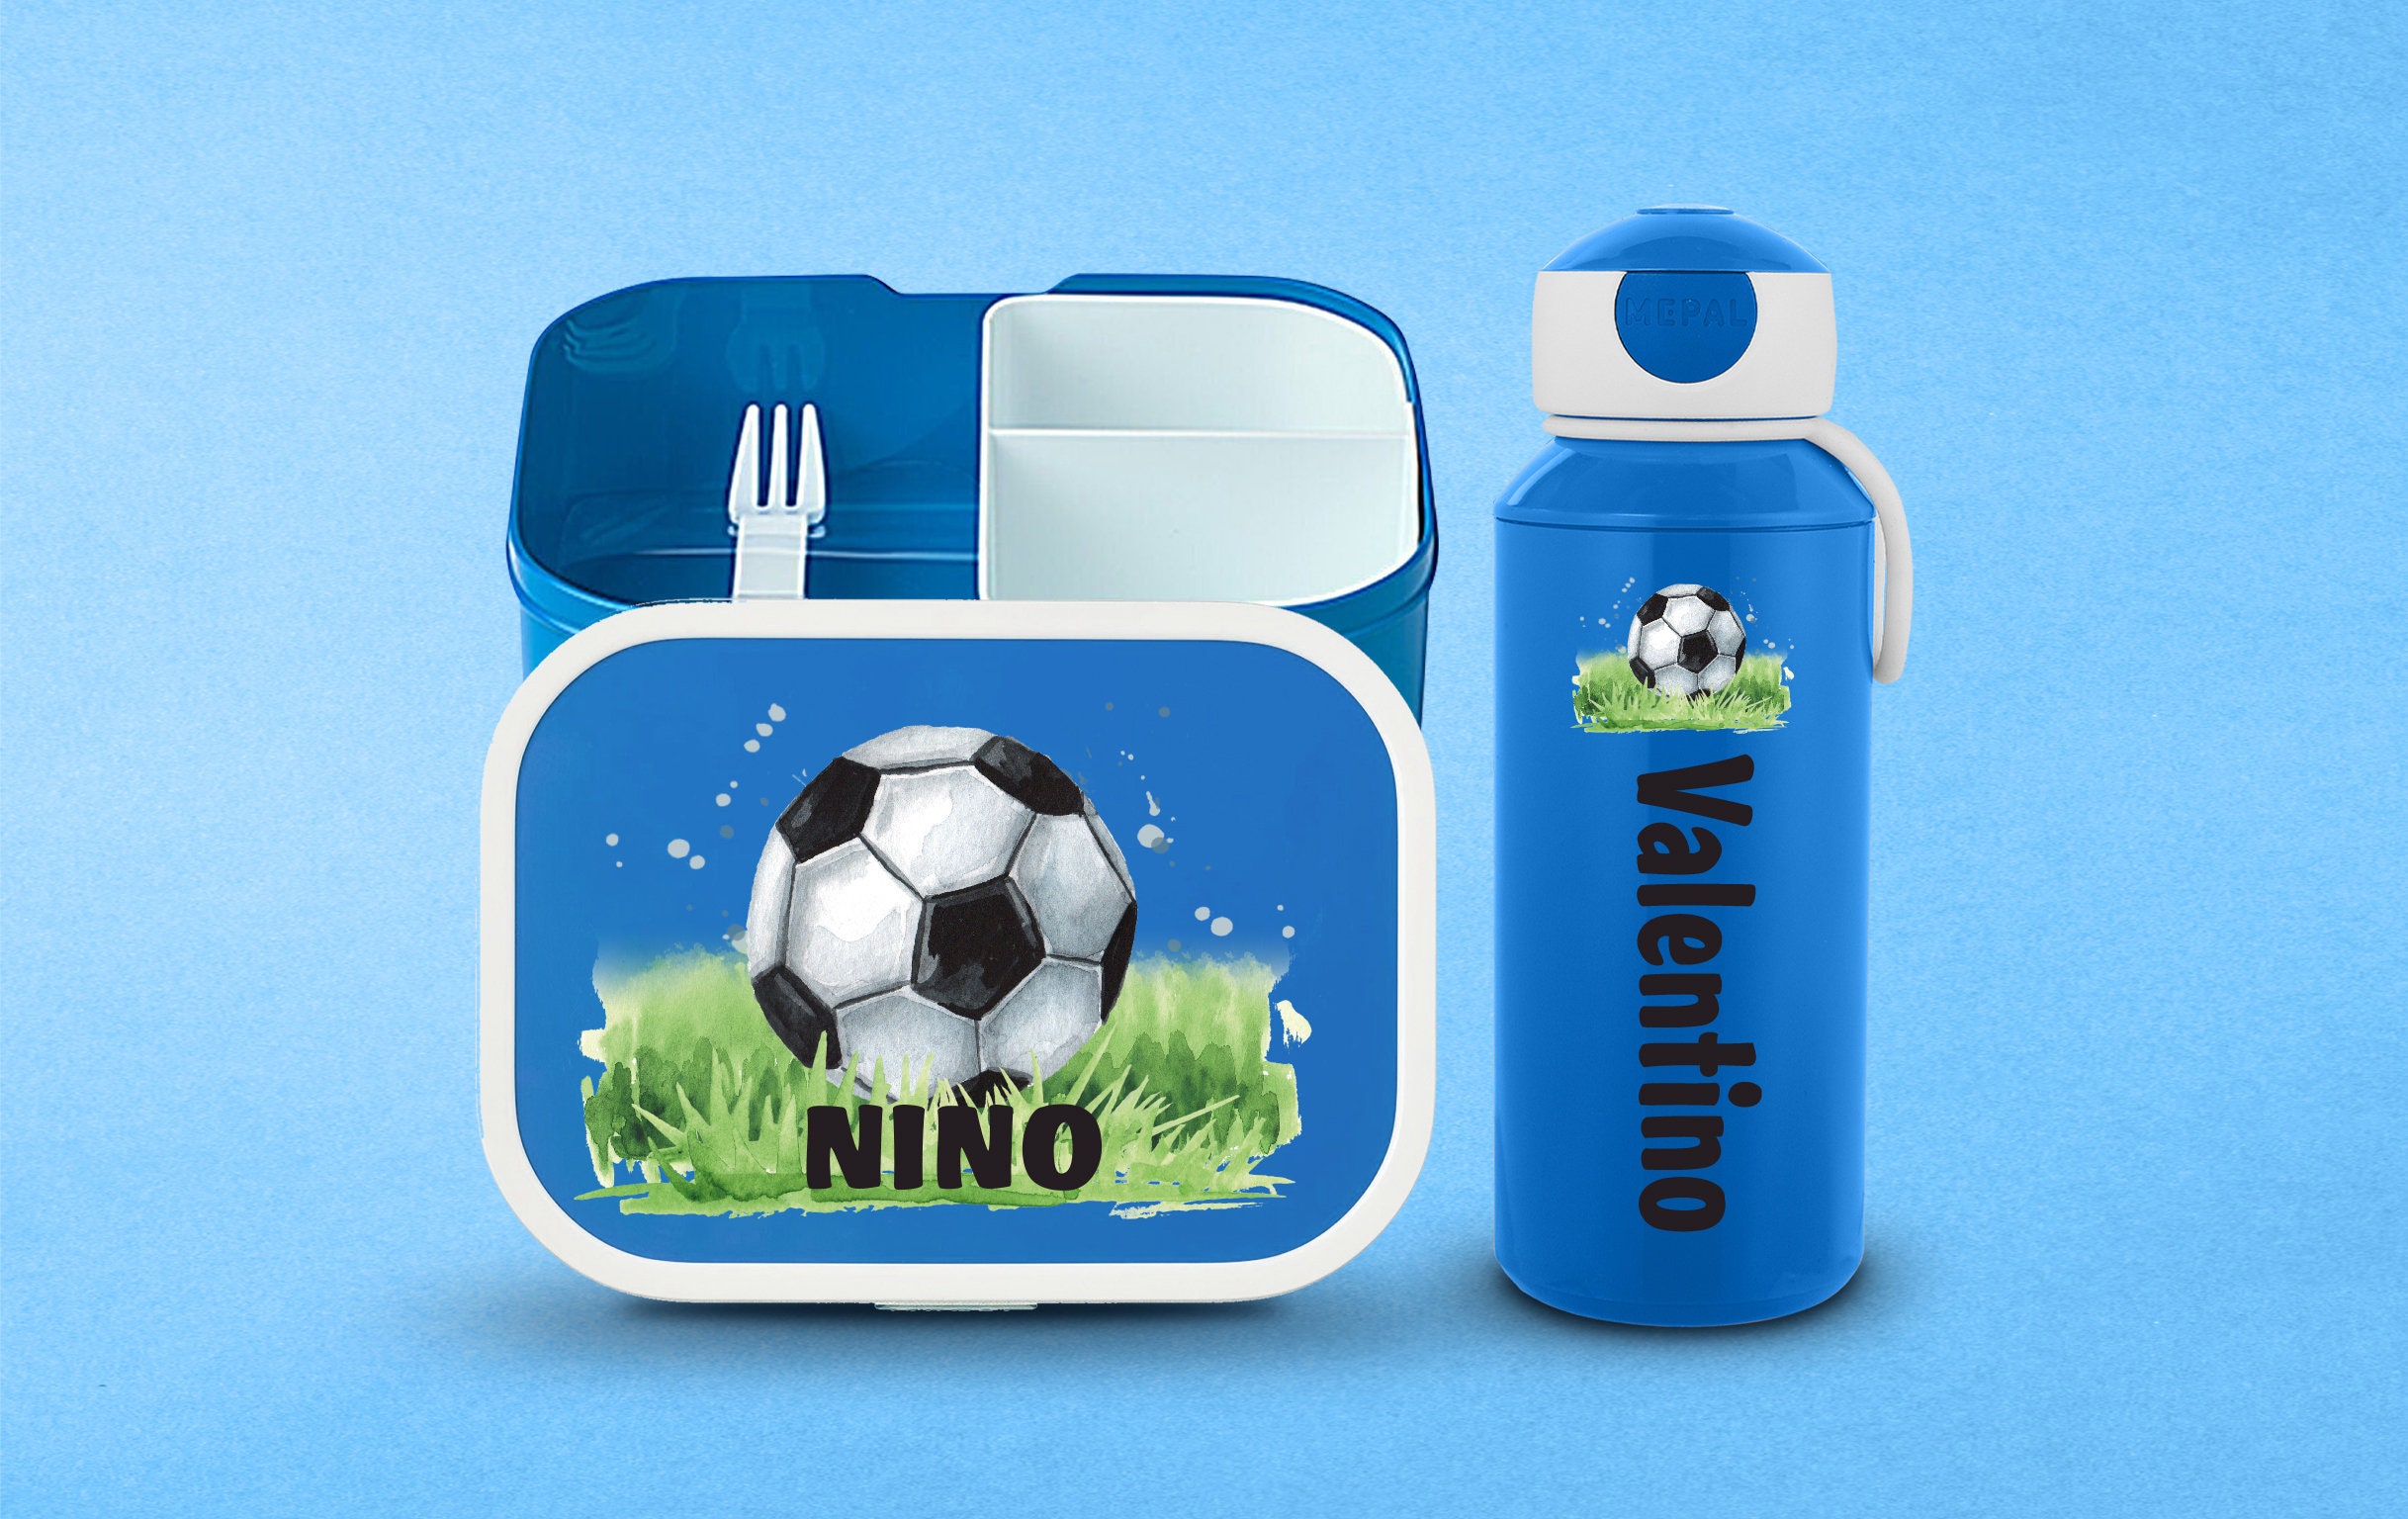 Soccer Print Soft Insulated Kids Personalized Thermal Lunch Box + Reviews